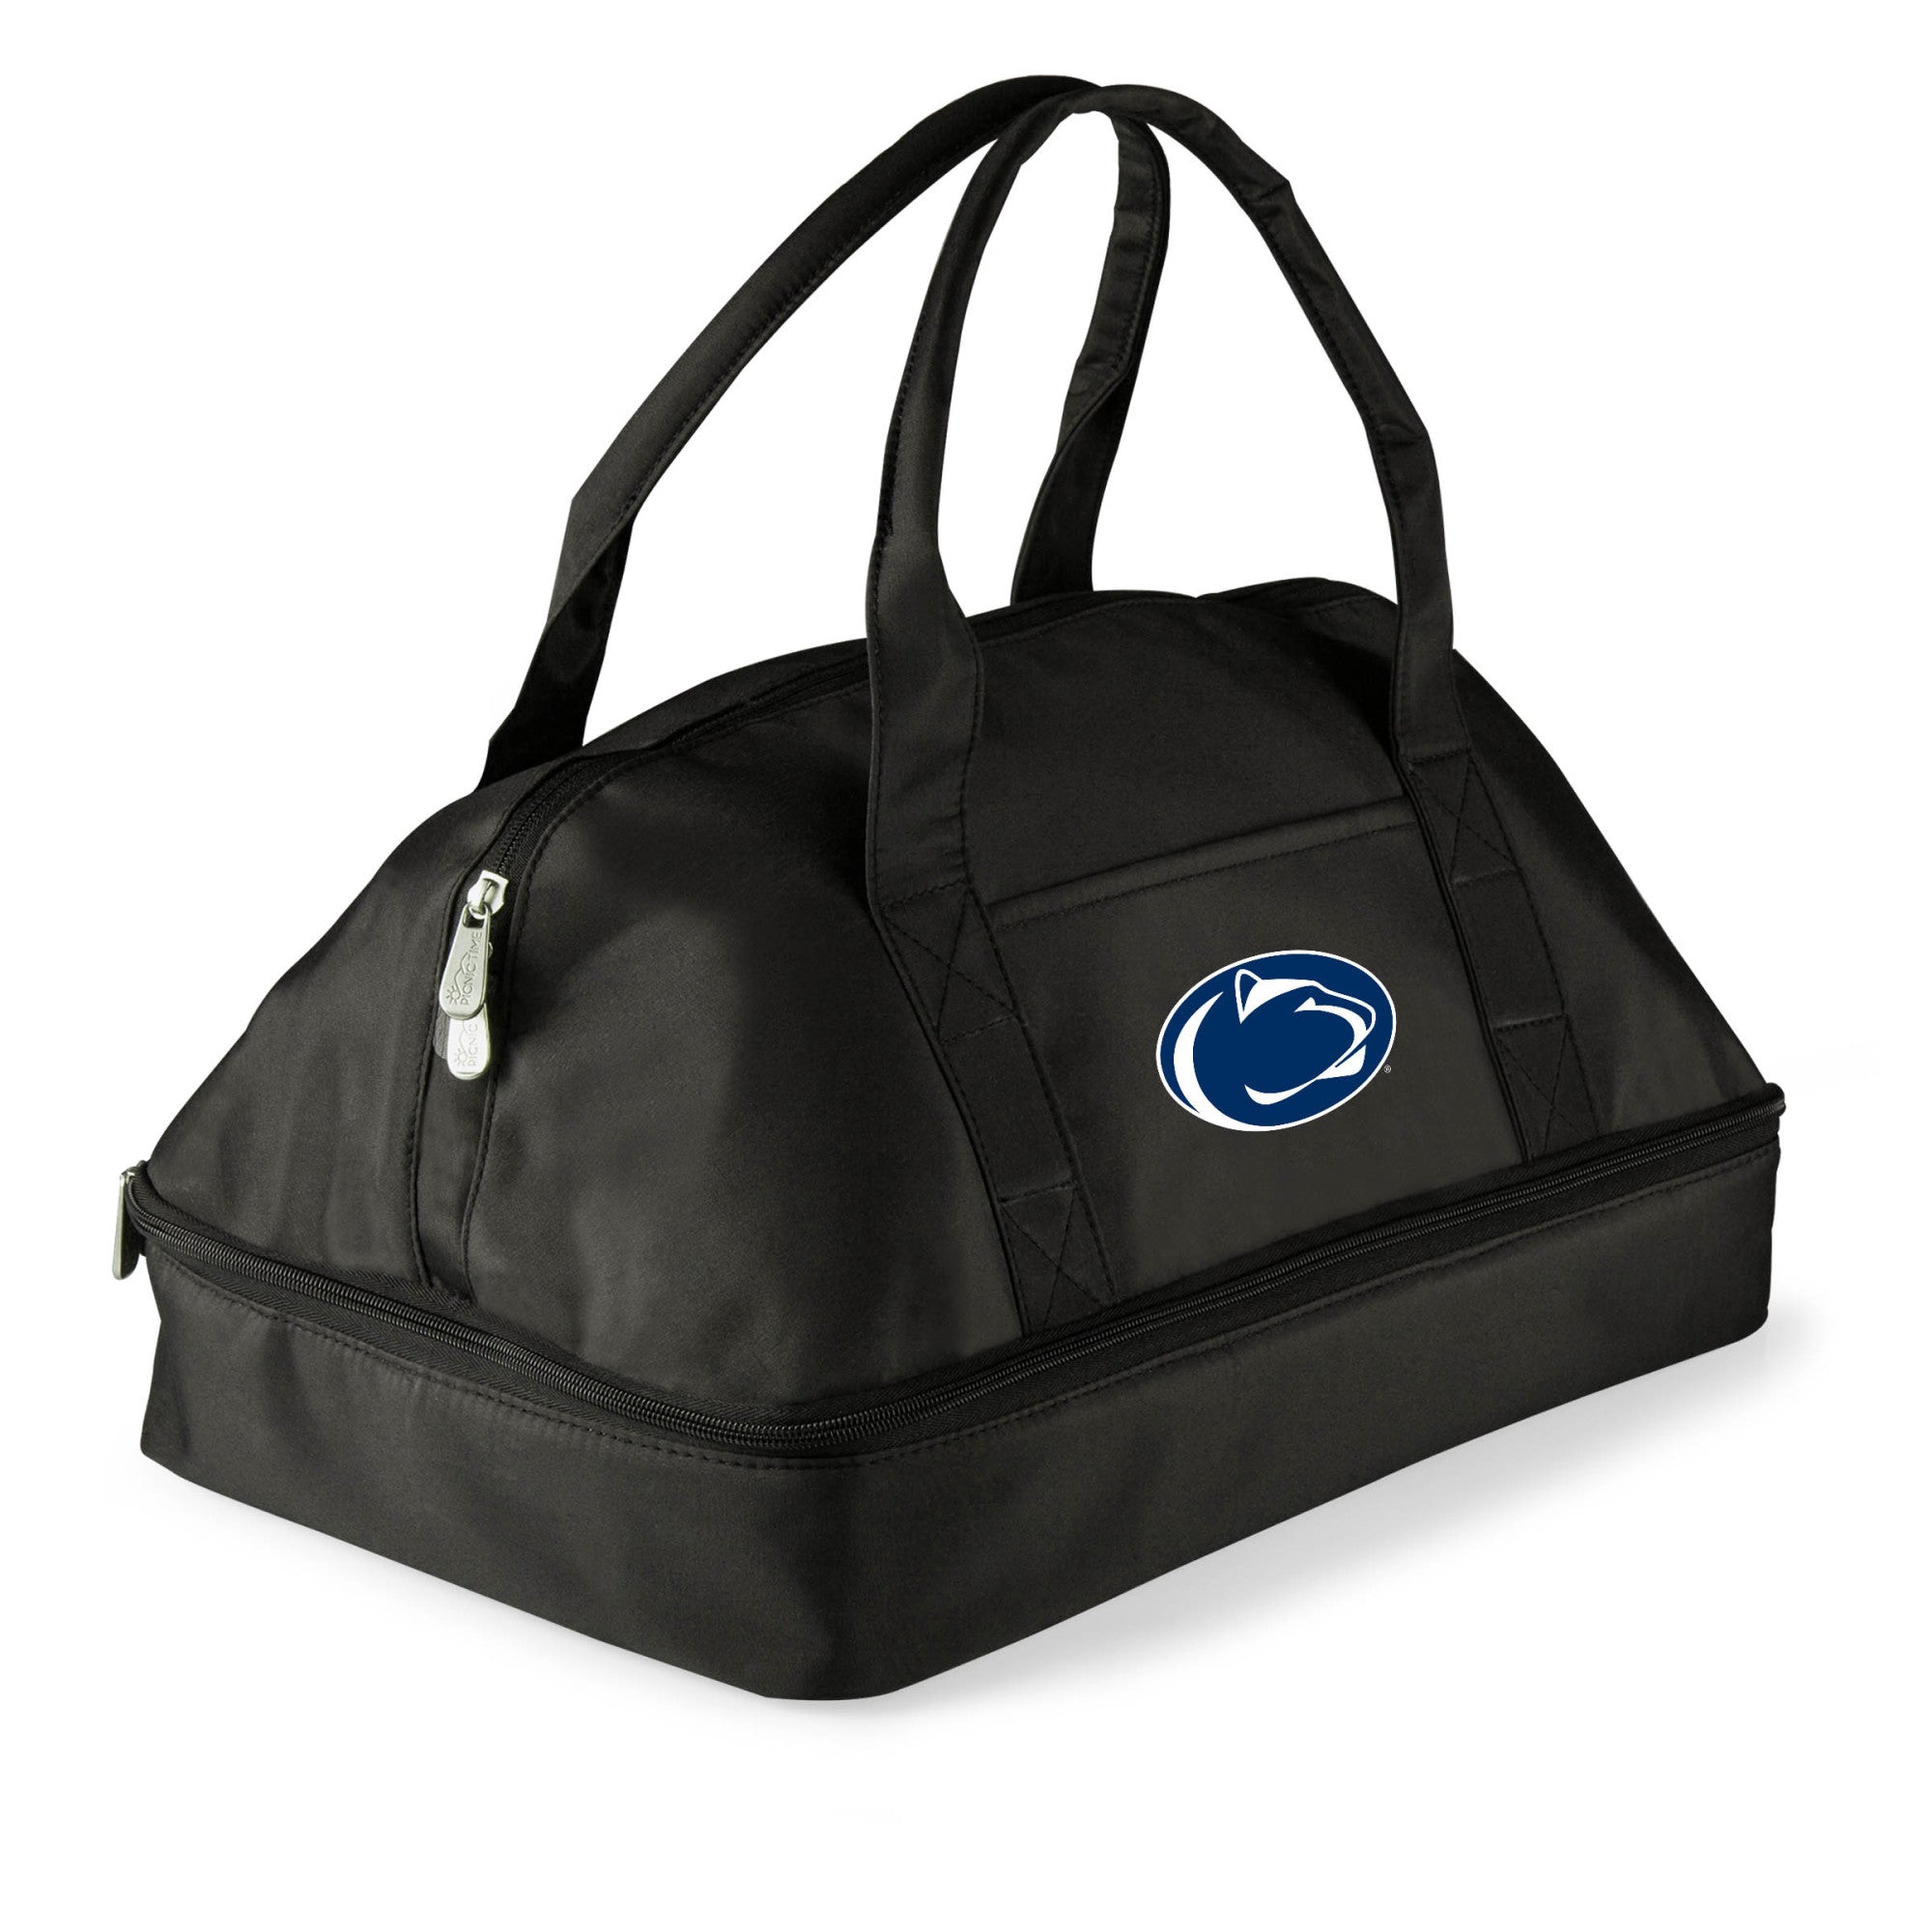 Penn State Nittany Lions - Potluck Casserole Tote